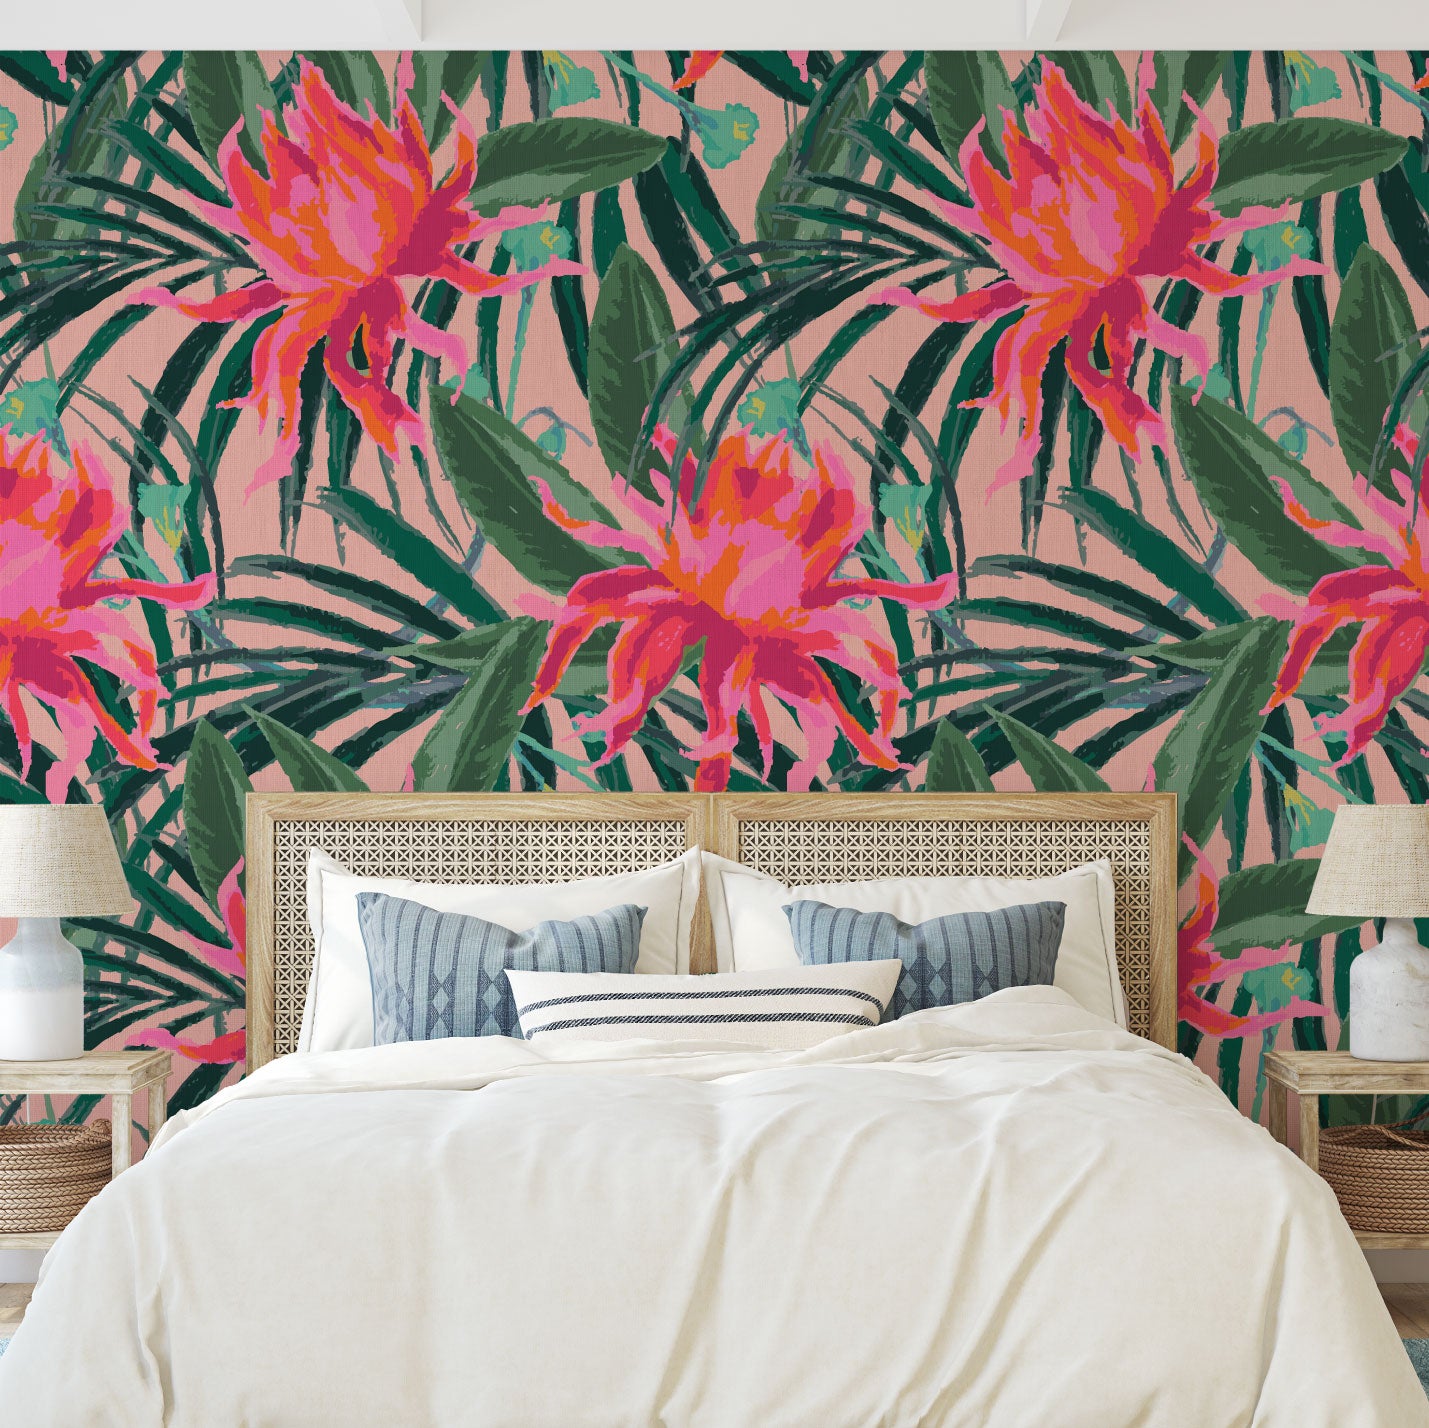 paper weave paperweave wallpaper with light pink based featuring oversized painterly tropical flowers and palm leafs in striking shades of pink and leafs in shades of deep green Natural Textured Eco-Friendly Non-toxic High-quality Sustainable Interior Design Bold Custom Tailor-made Retro chic Tropical Jungle Coastal preppy Garden Seaside Coastal Seashore Waterfront Vacation home styling Retreat Relaxed beach vibes Beach cottage Shoreline Oceanfront botanical palm leaf bedroom